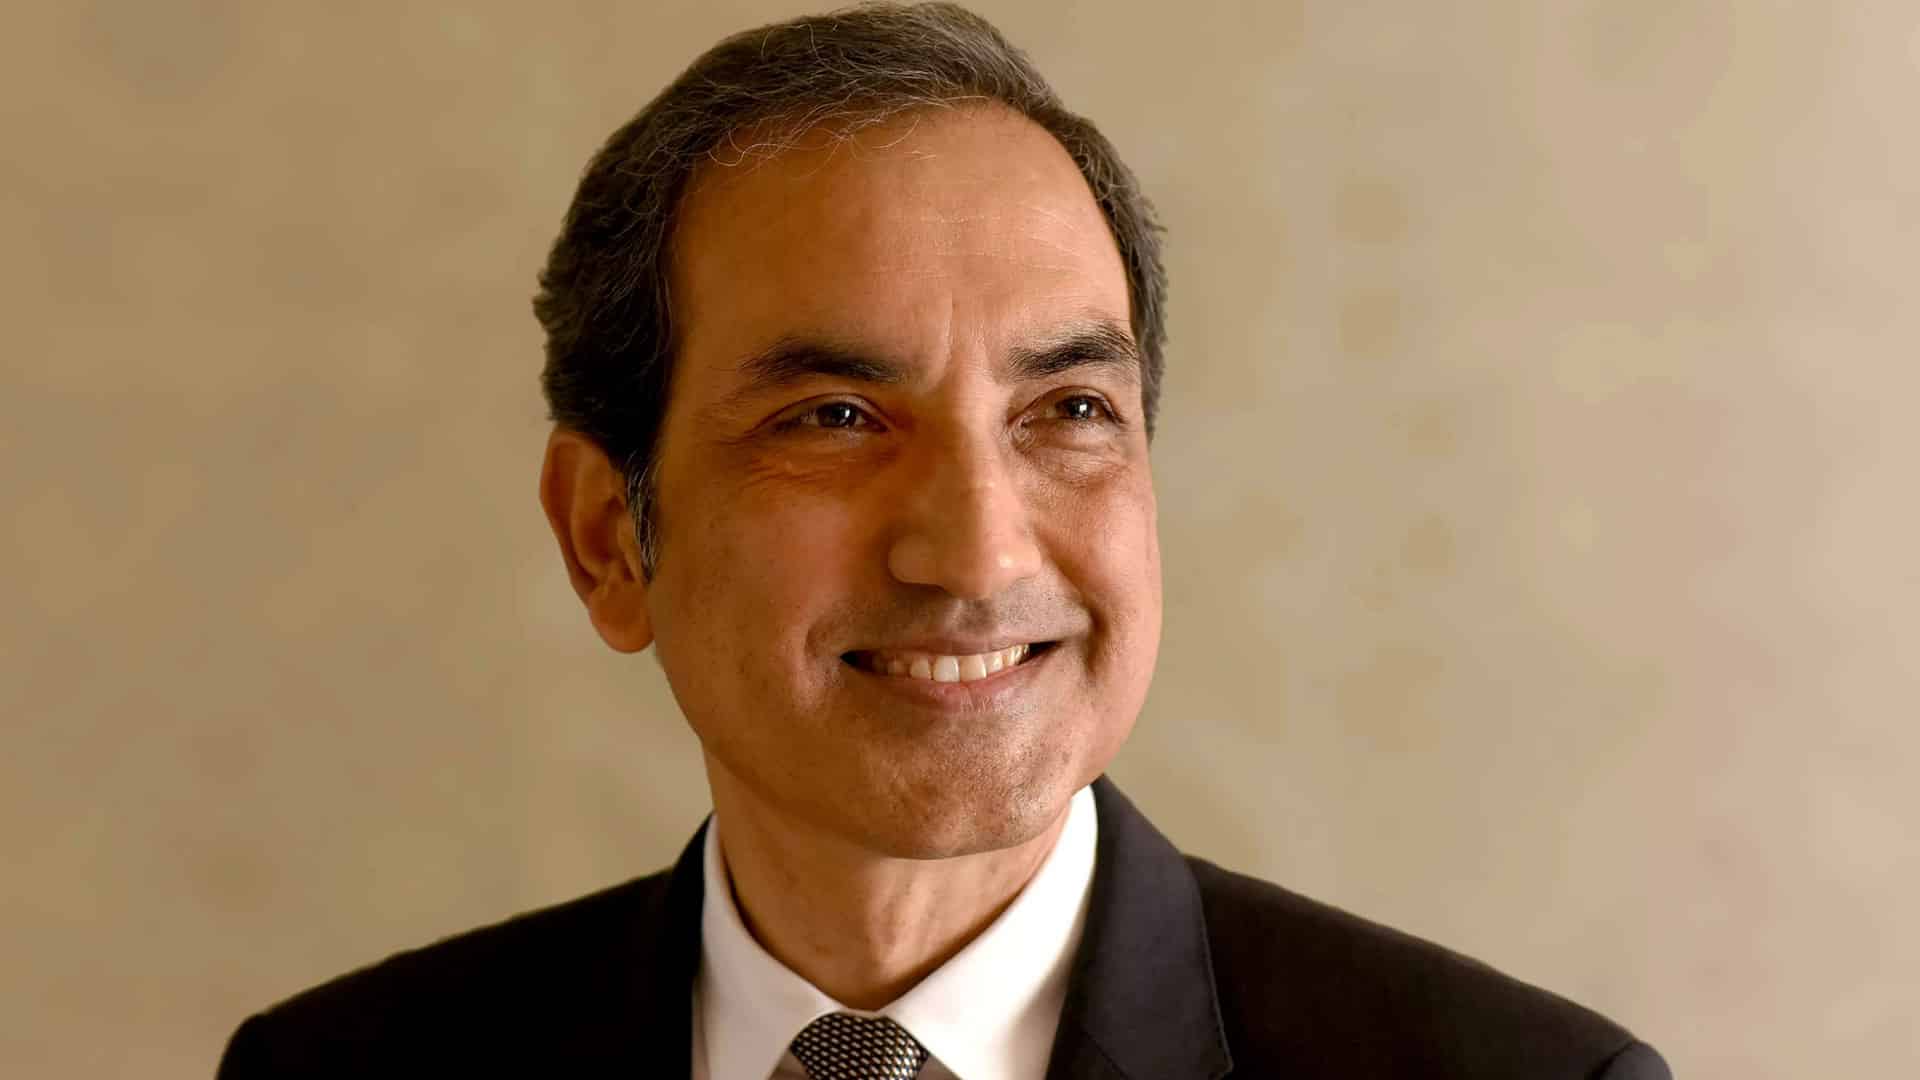 HUL appoints Rohit Jawa as new MD & CEO, Sanjiv Mehta to retire